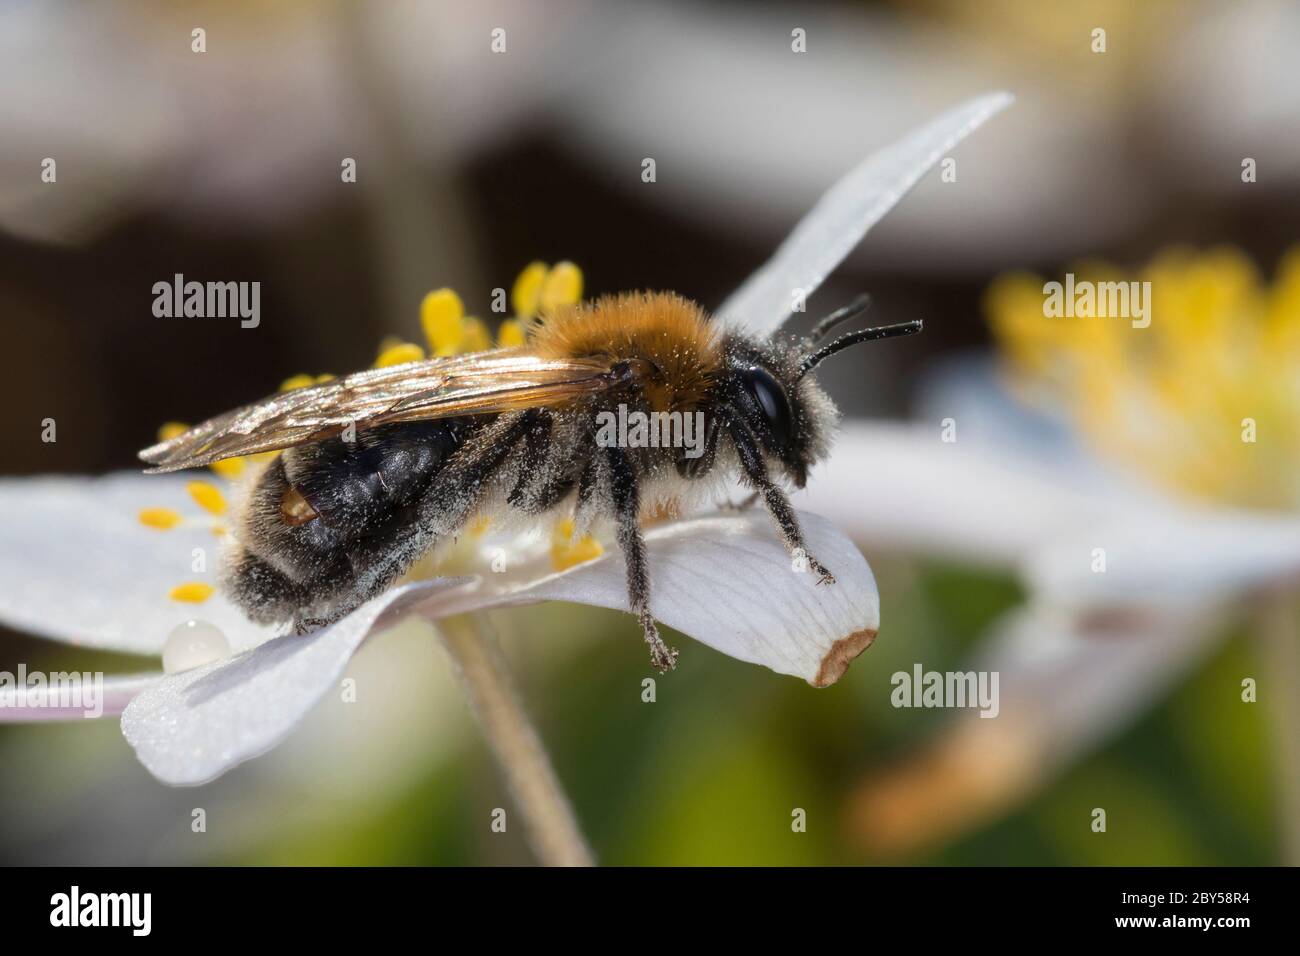 Mining-Bee (Andrena spec.), visiting a flower of a wood anemone, Anemone nemorosa, with female Stresipteron in puparium, breaking through segments of the abdomen, Germany Stock Photo